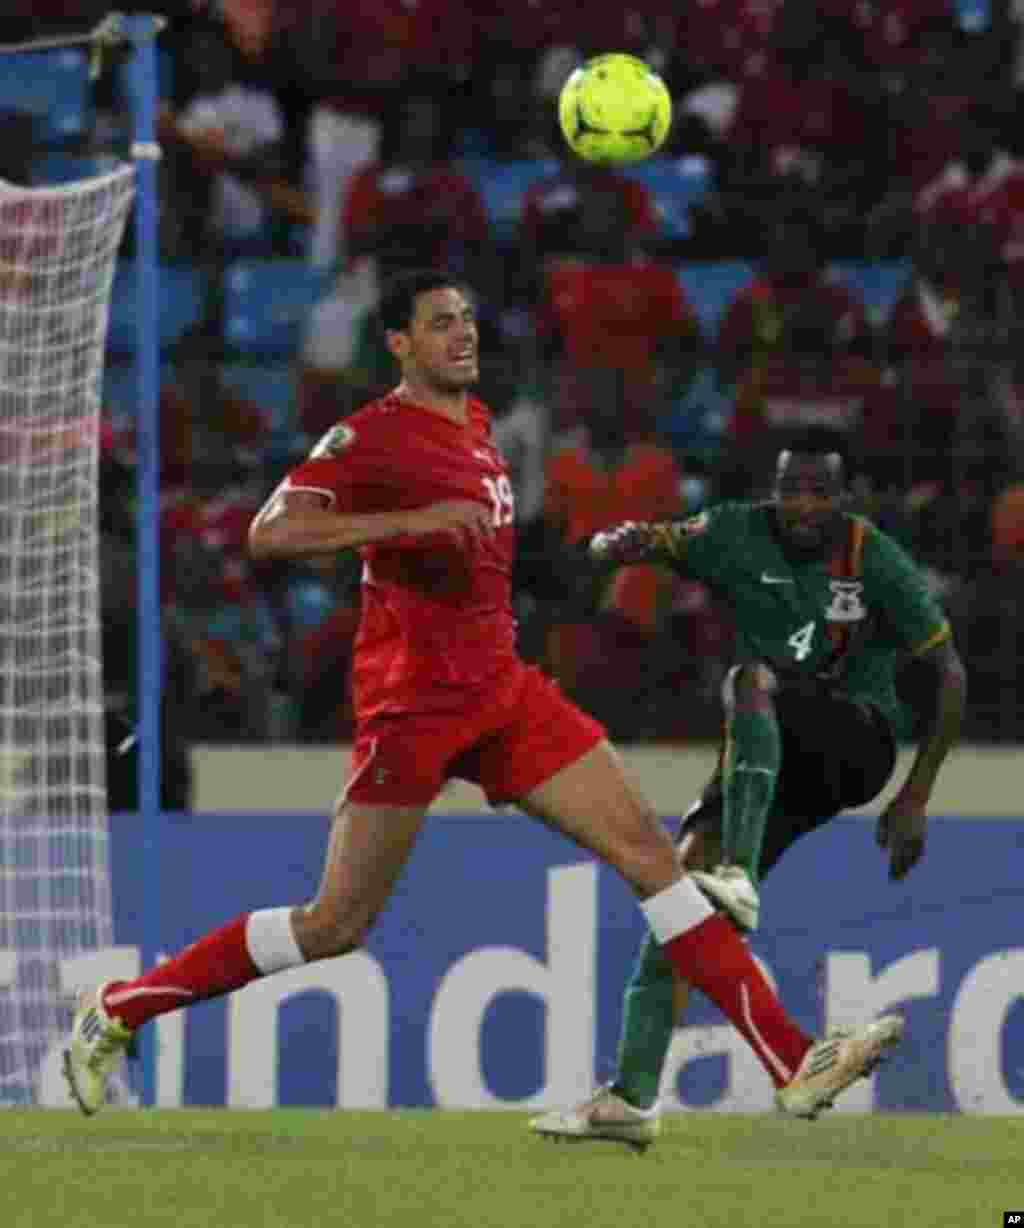 Ivan Fabiani (L) of Equatorial Guinea fights for the ball with Joseph Musonda of Zambia during their African Nations Cup soccer match in Malabo January 29, 2012.